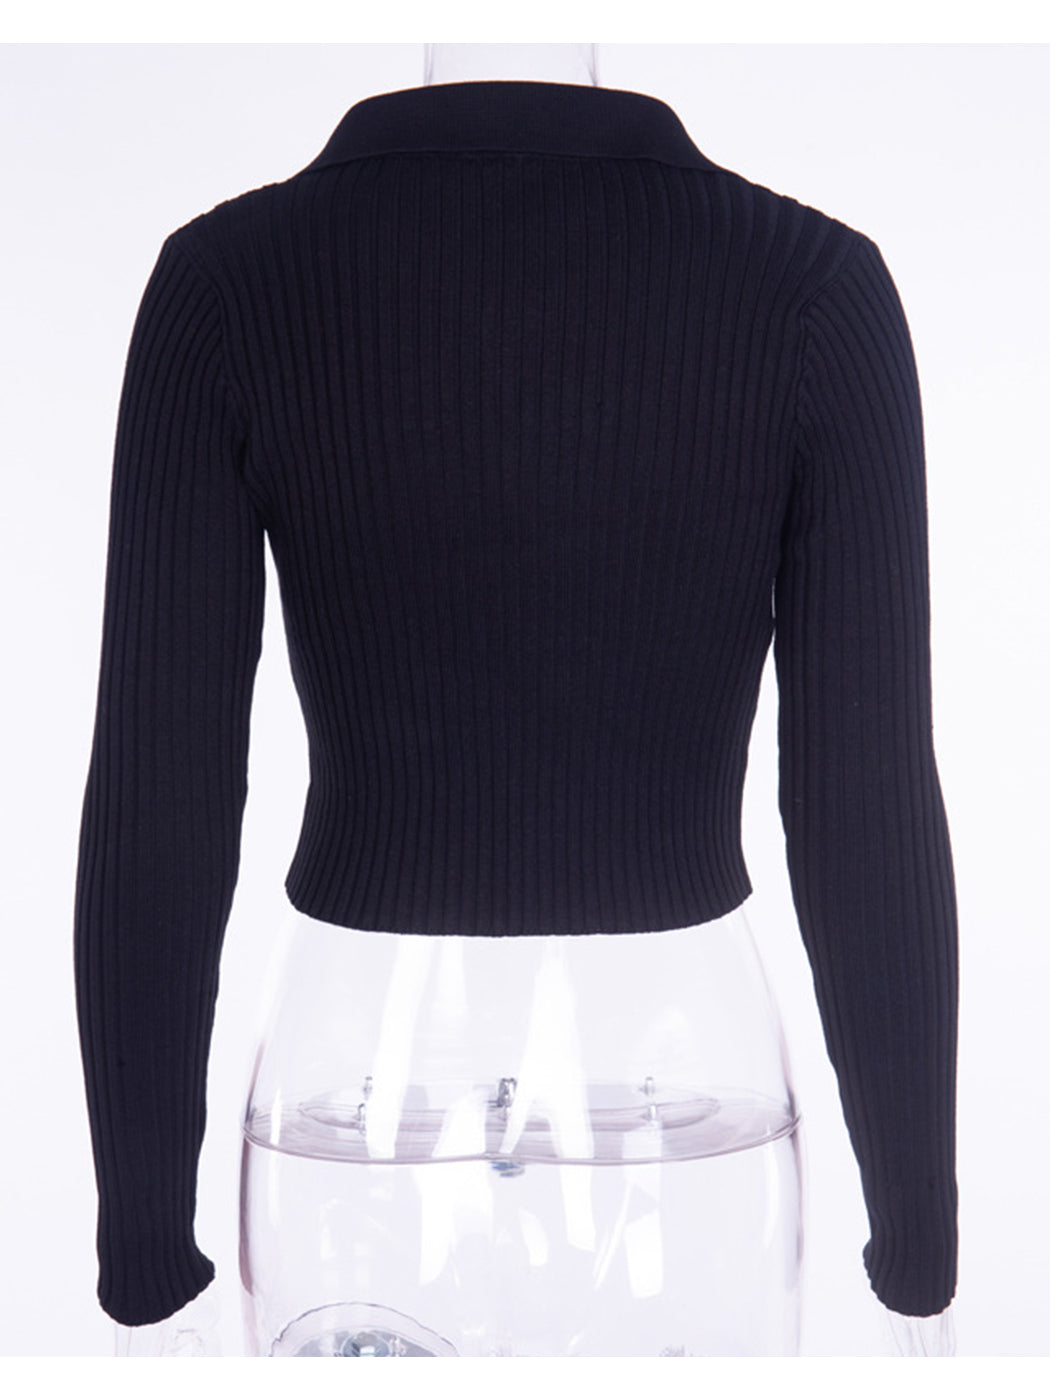 Knitted Half Turtleneck Sweater Top